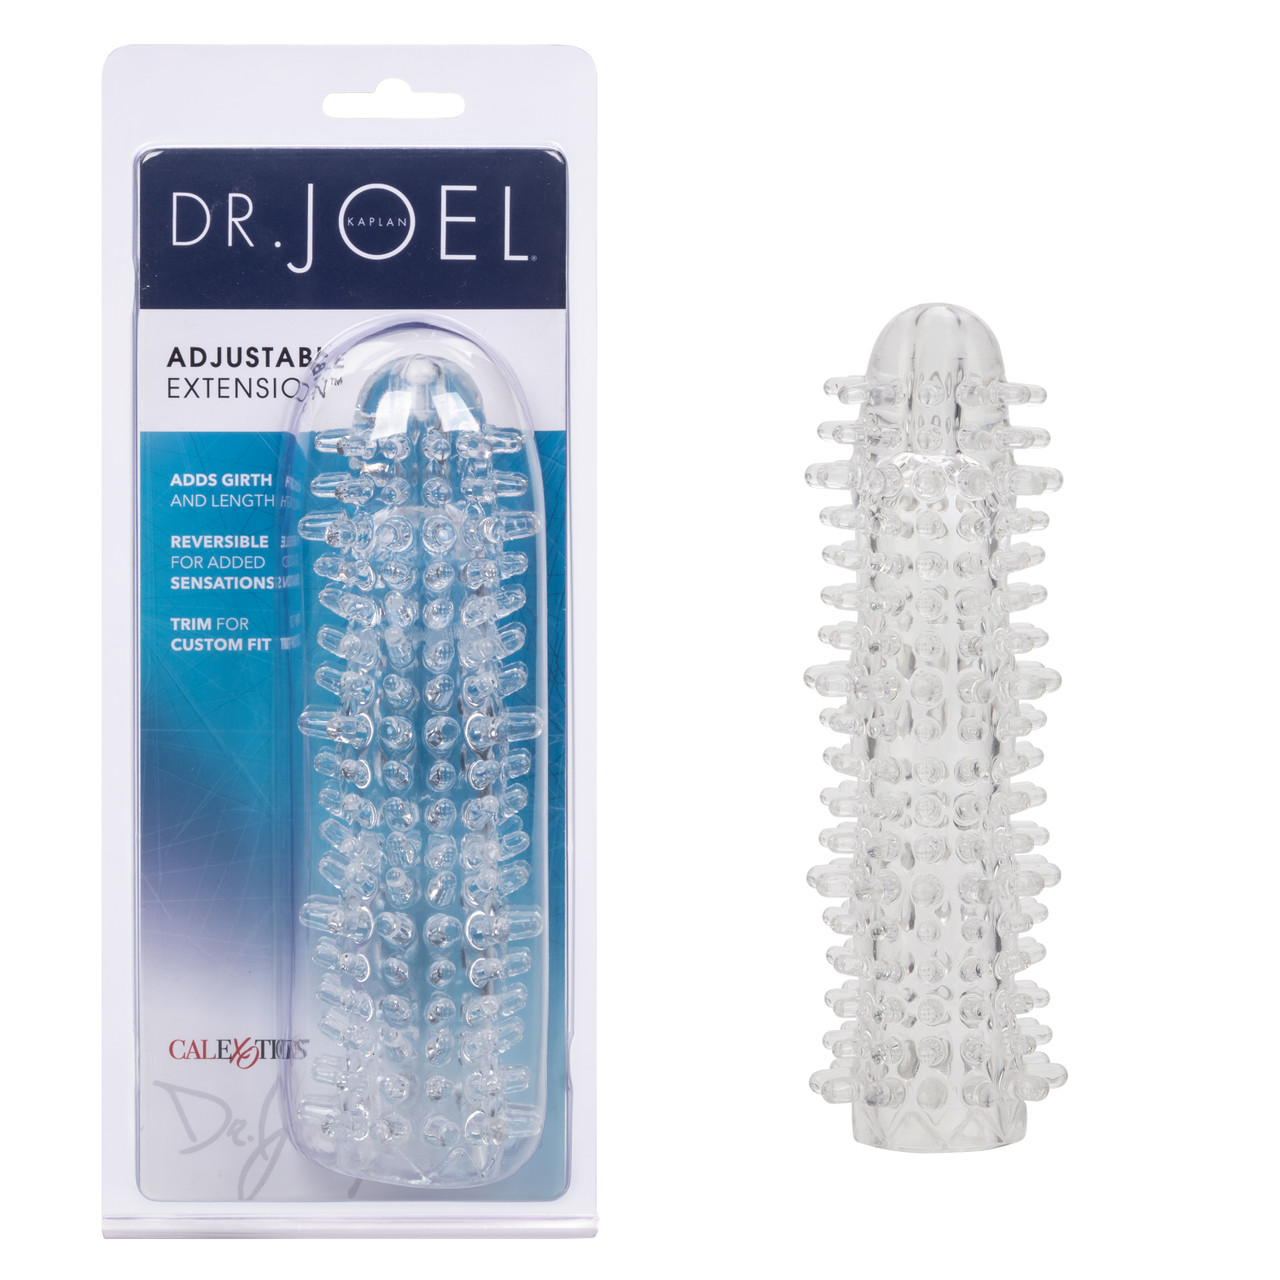 DR JOEL ADJUSTABLE EXTENSION CLEAR - Click Image to Close